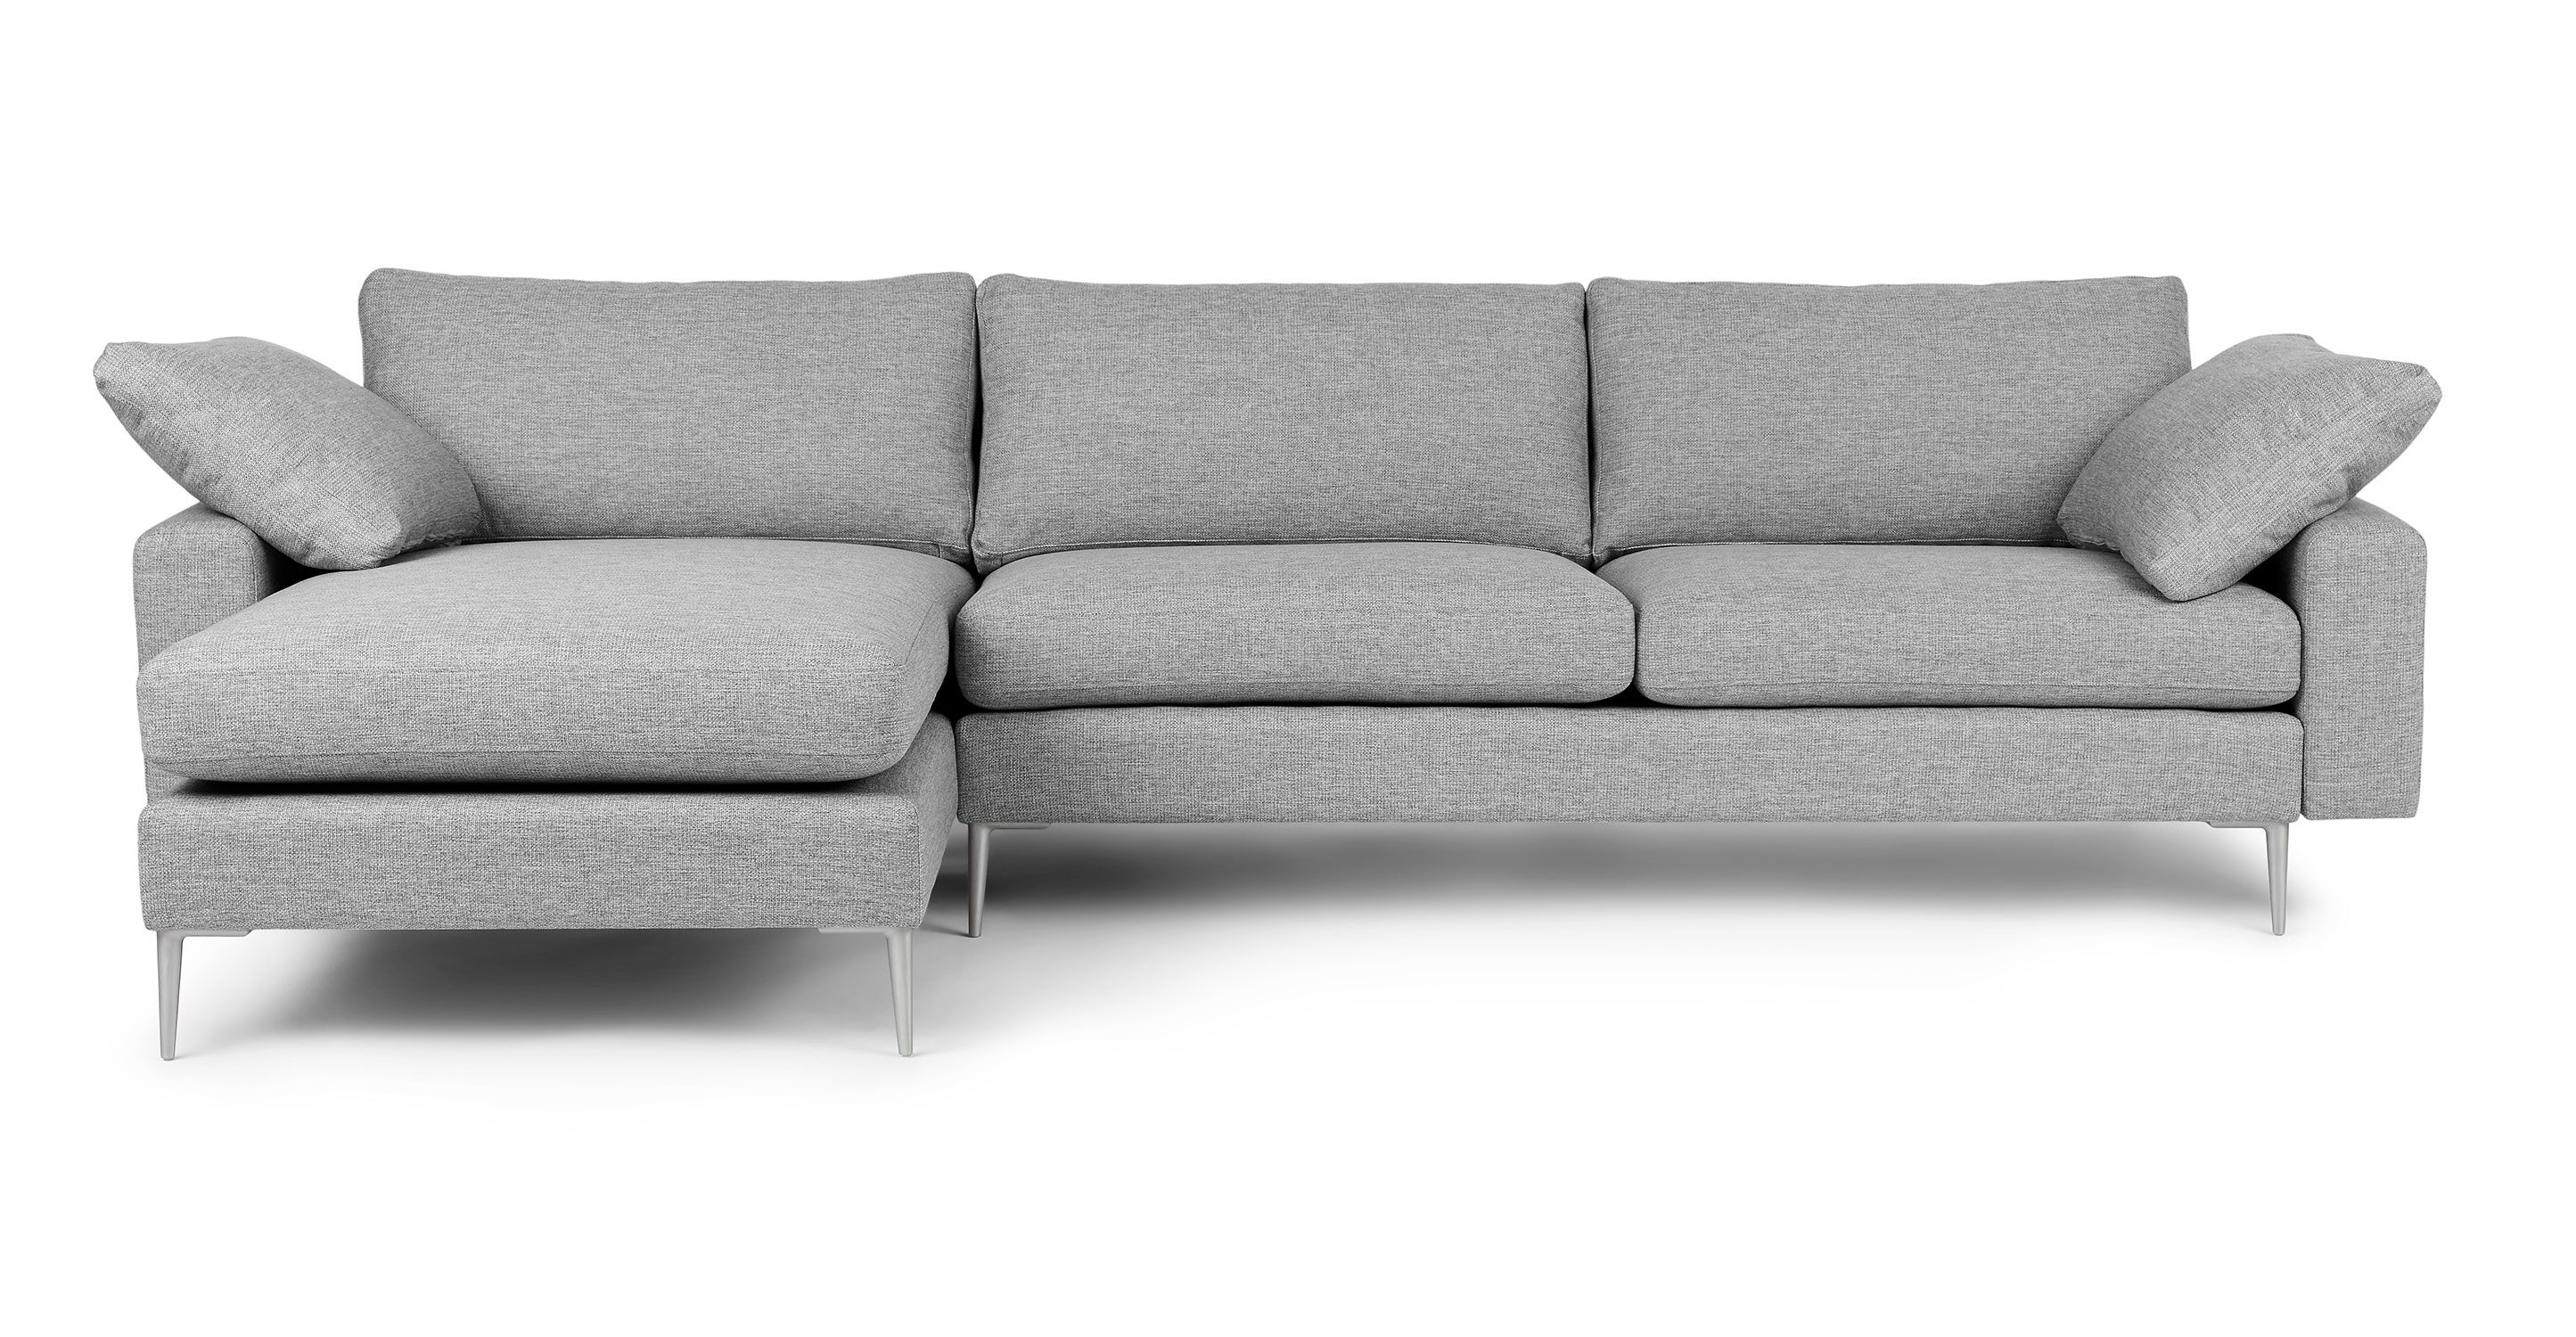 Winter Gray Reversible Fabric Sectional | Nova | Article For Reversible Sectional Sofas (View 9 of 20)